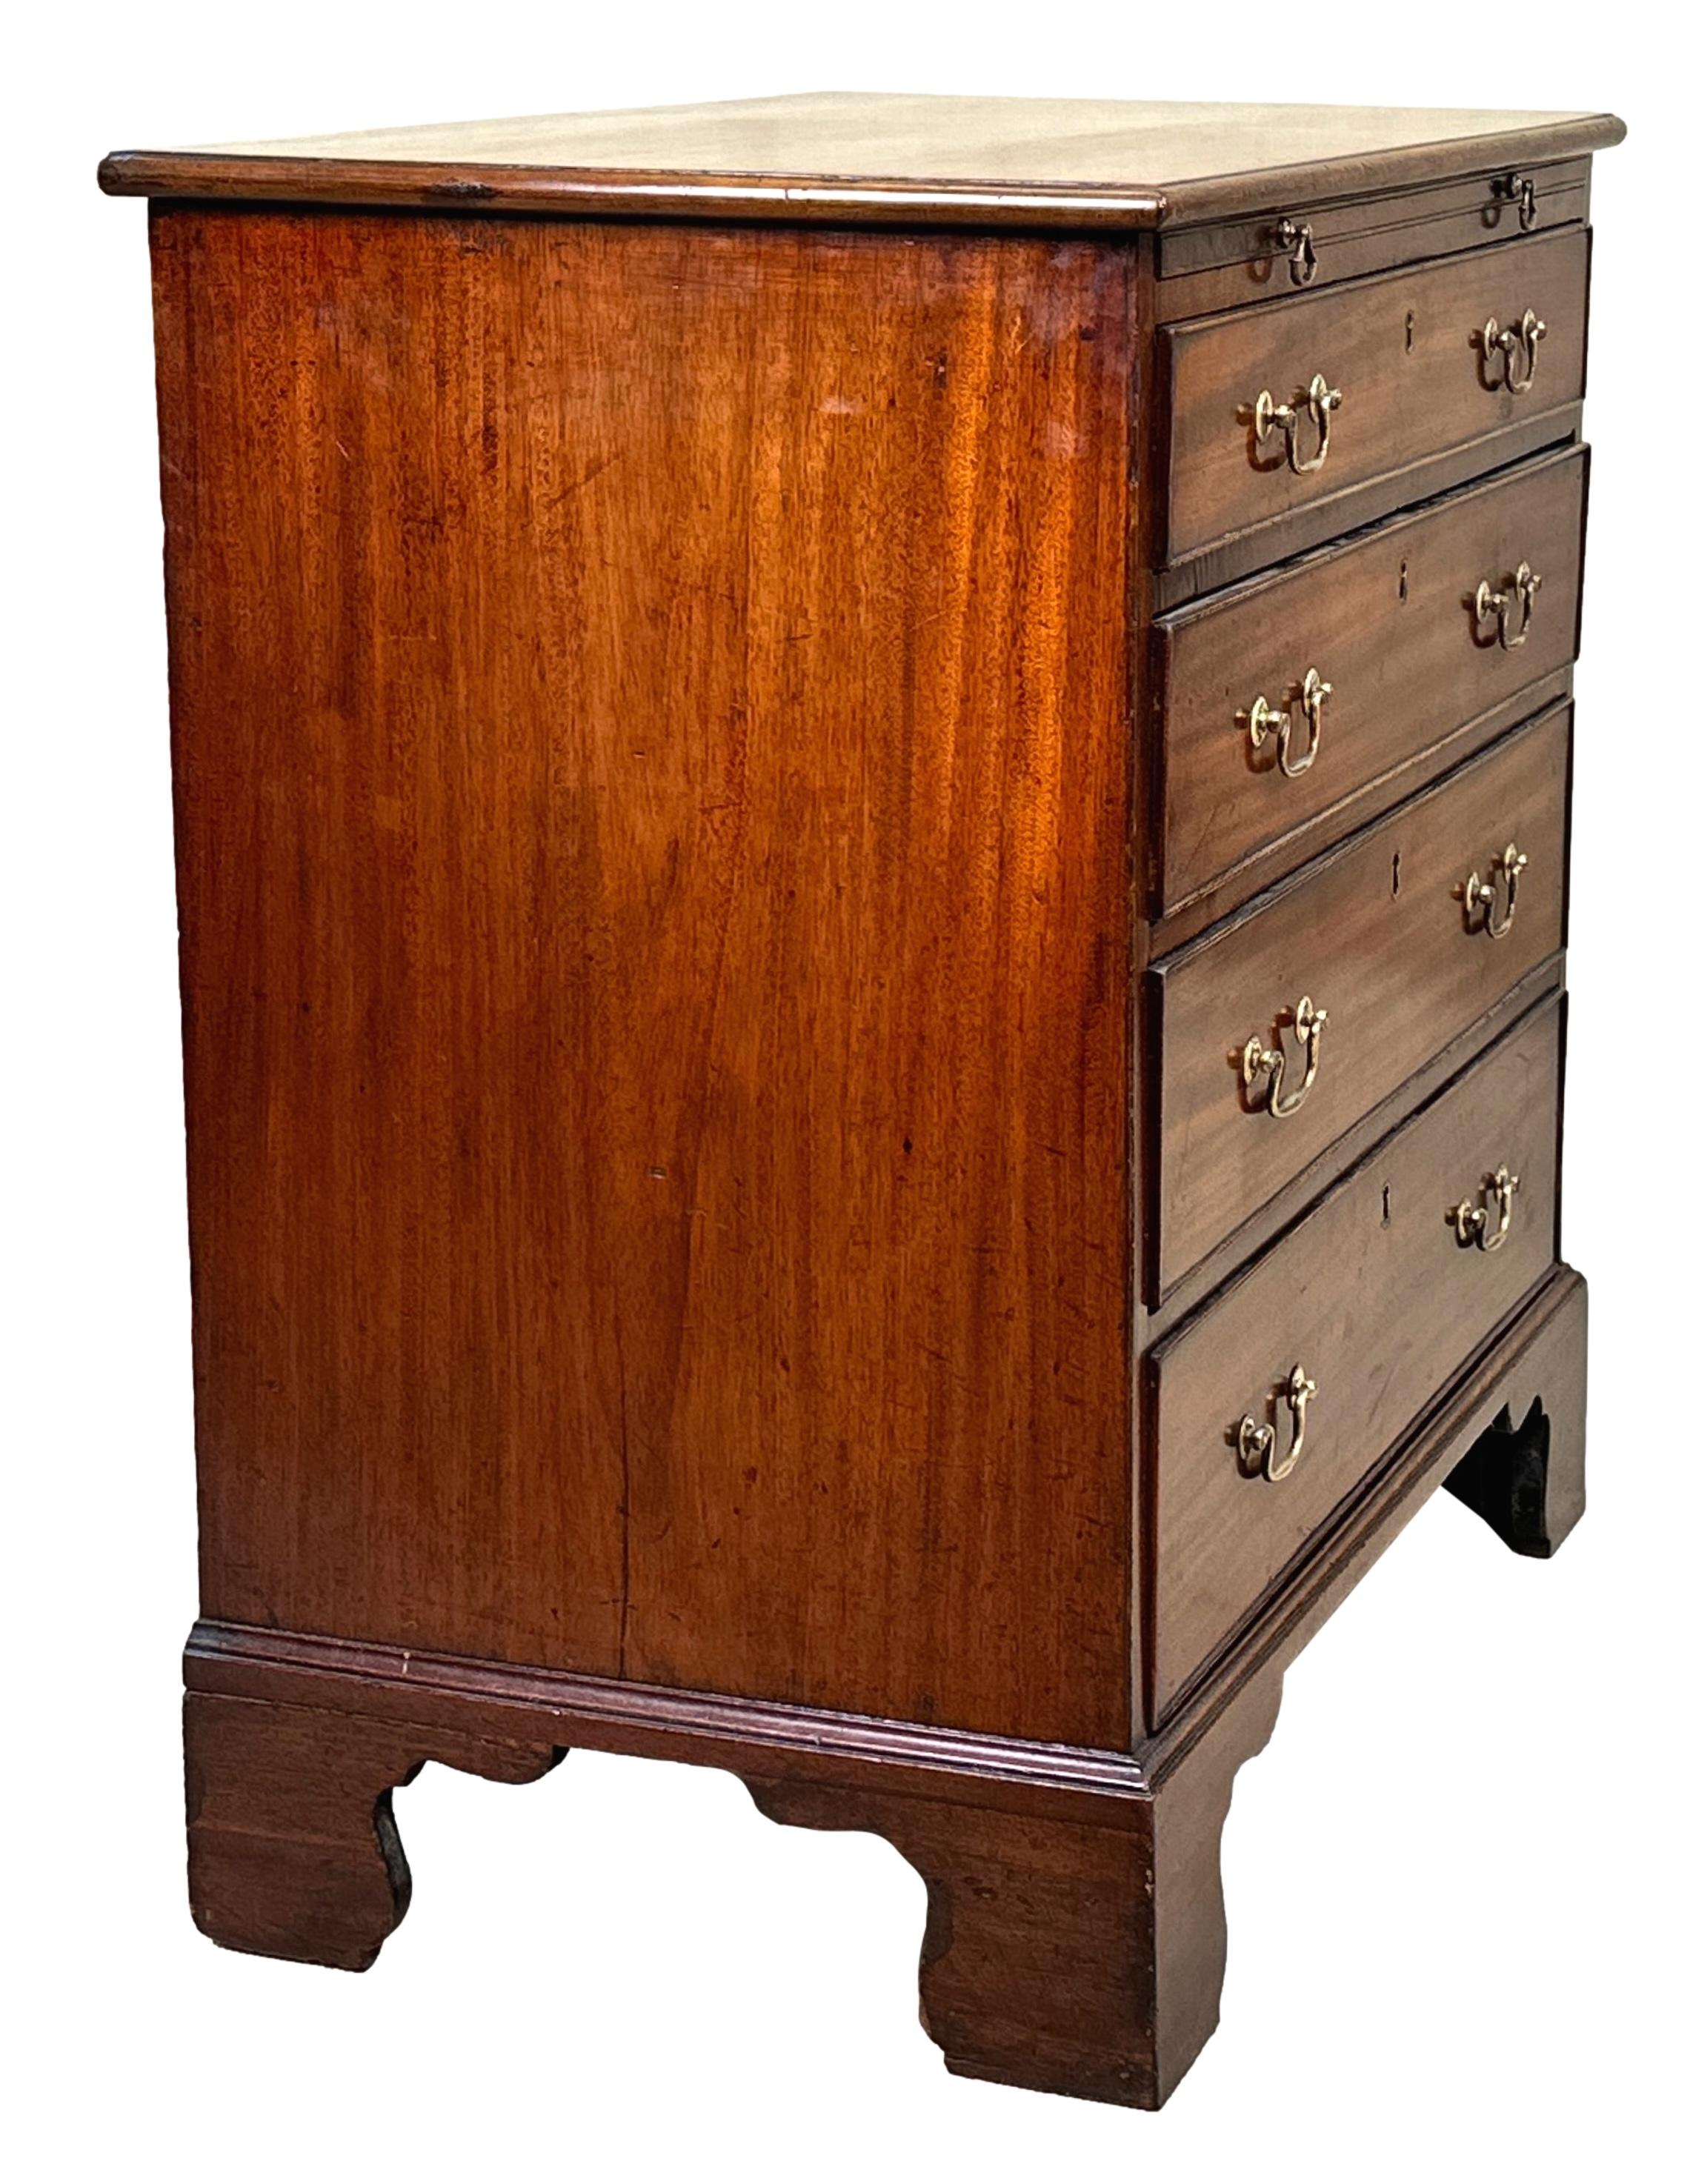 A Very Good Quality 18th Century Georgian Mahogany Chest Of Small Proportion Retaining Good Colour And Patina Throughout, The Well Figured Top Over Brushing Slide And Four Graduated Long Drawers Retaining Original Brass Swan Neck Handles Raised On